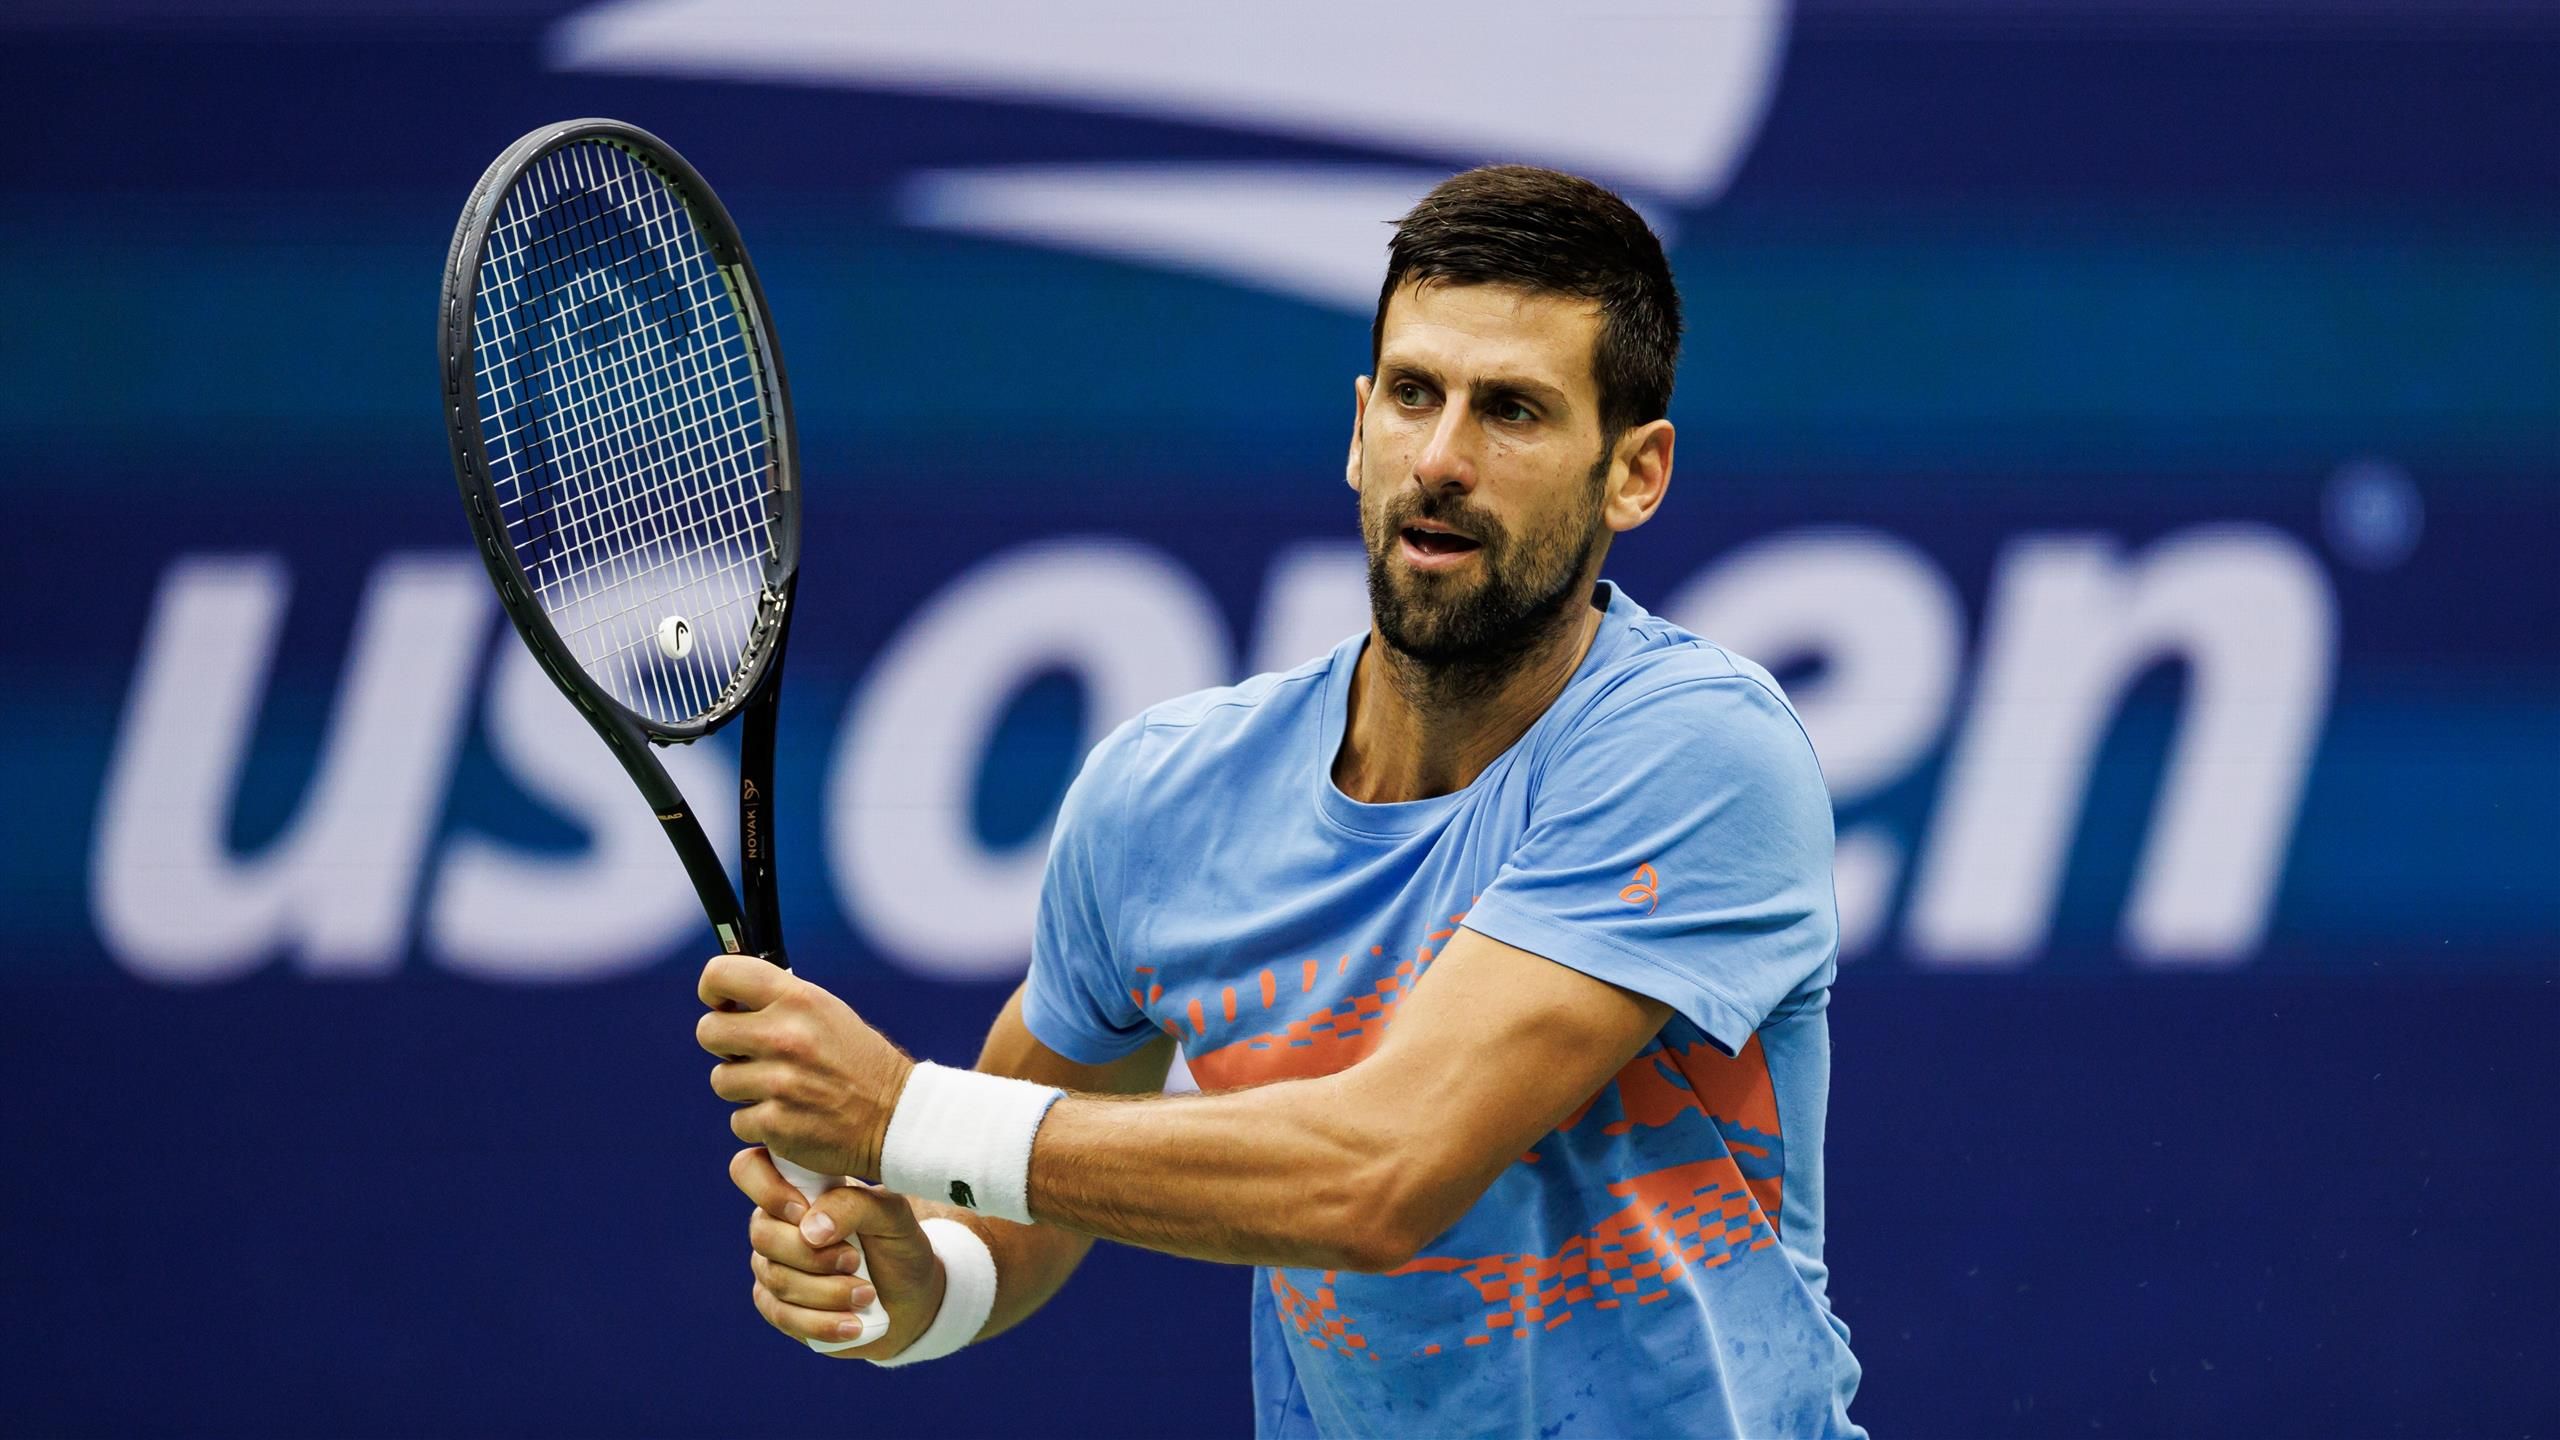 US Open 2023 Day 1 Order of play and schedule - When are Iga Swiatek, Novak Djokovic playing?